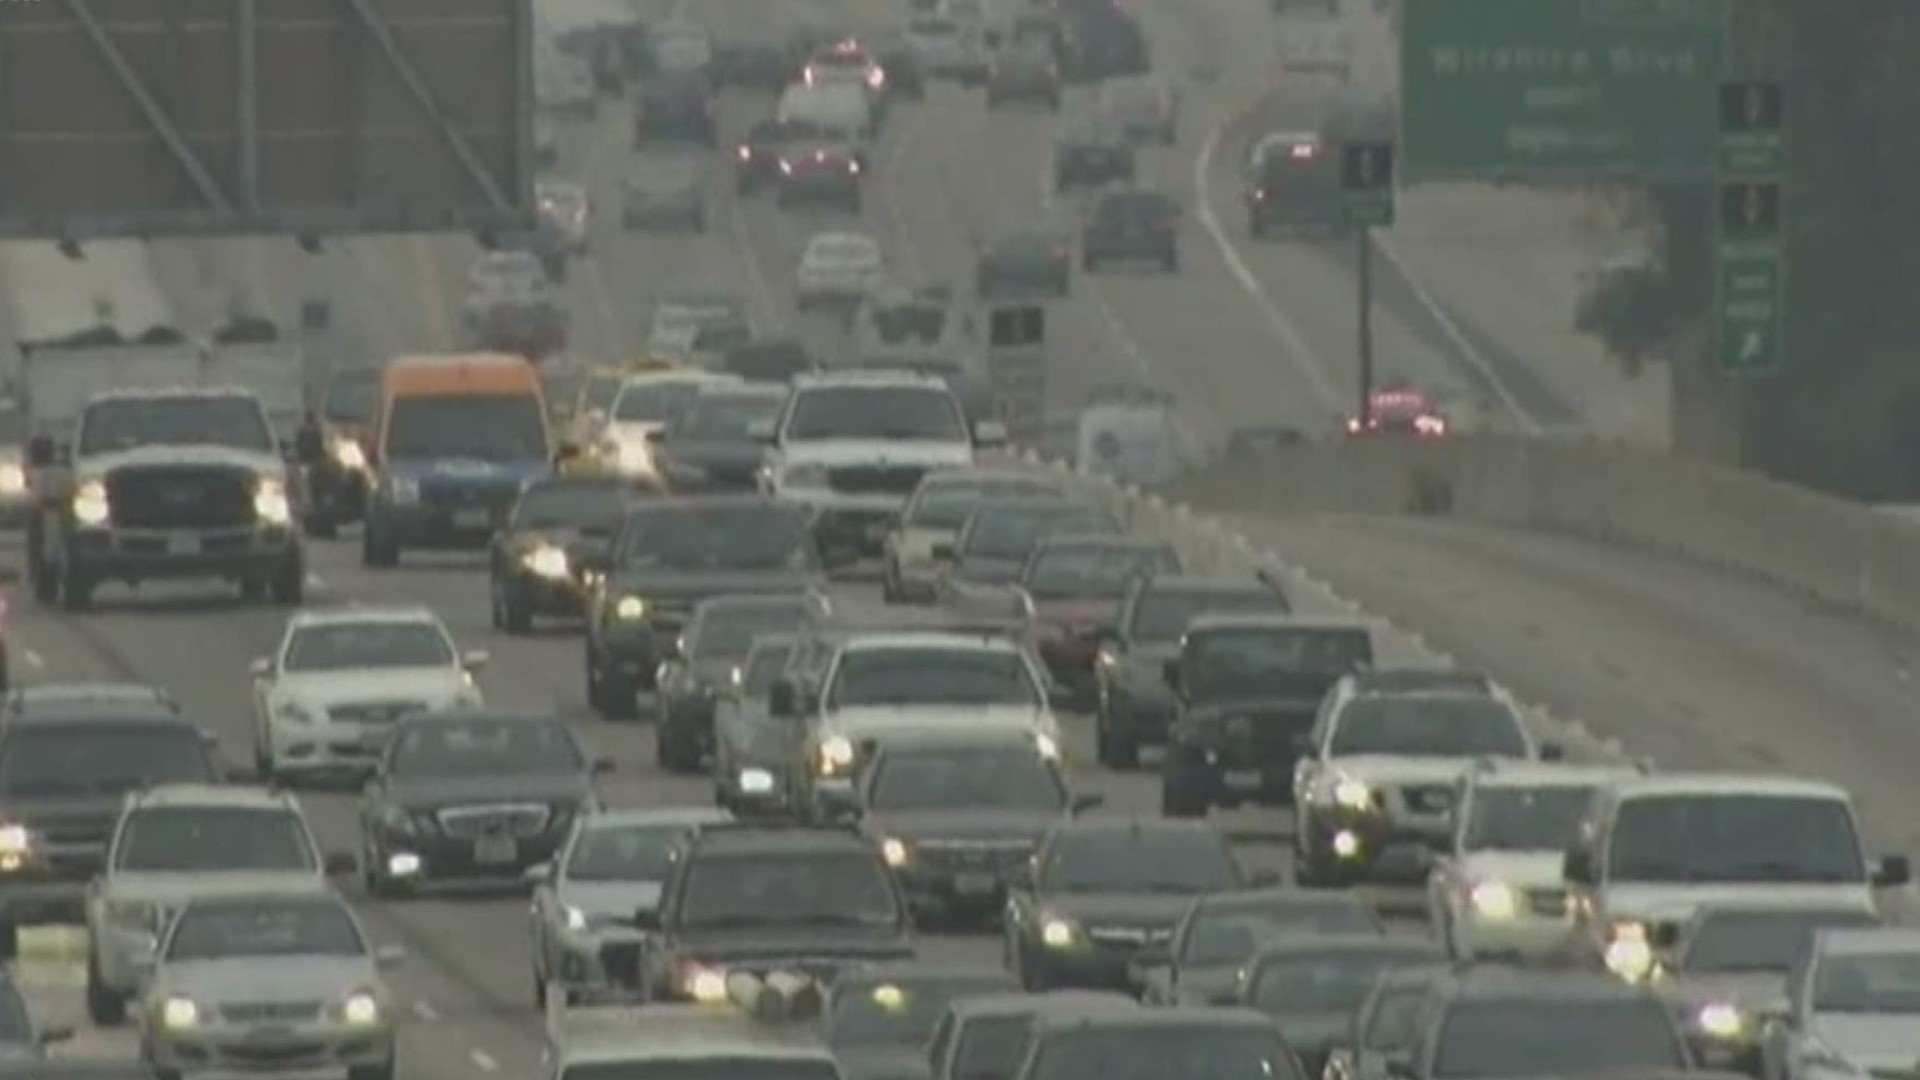 Atlanta ranked 10th nationwide for traffic congestion - down a spot from last year - in a recent survey.